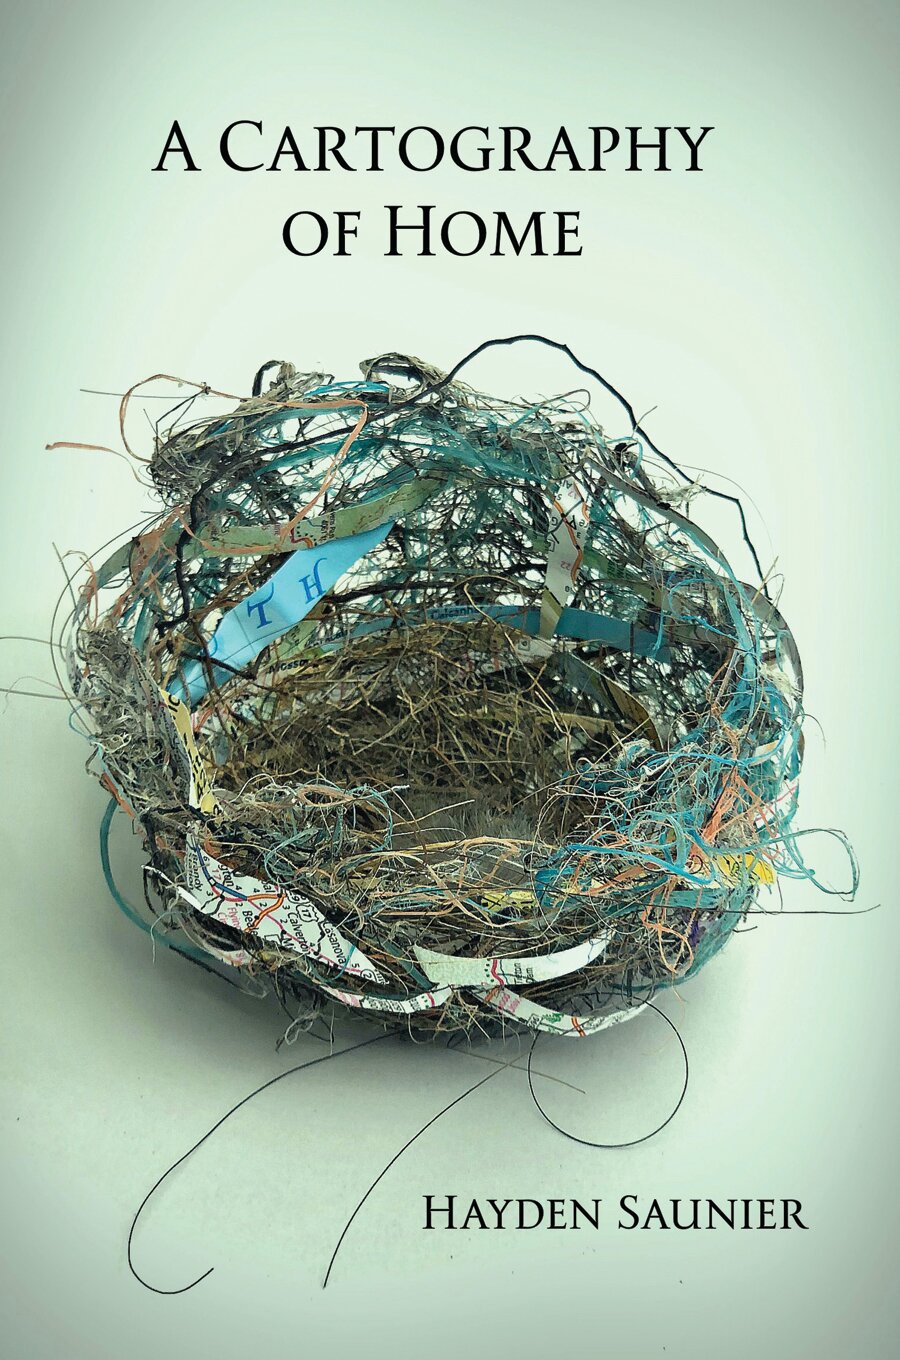 Hayden Saunier created the cover art for her most recent book by embellishing a nest with slivers of maps, blue baling twine, and other found bits. Readers can sample her work here: www.haydensaunier.com.